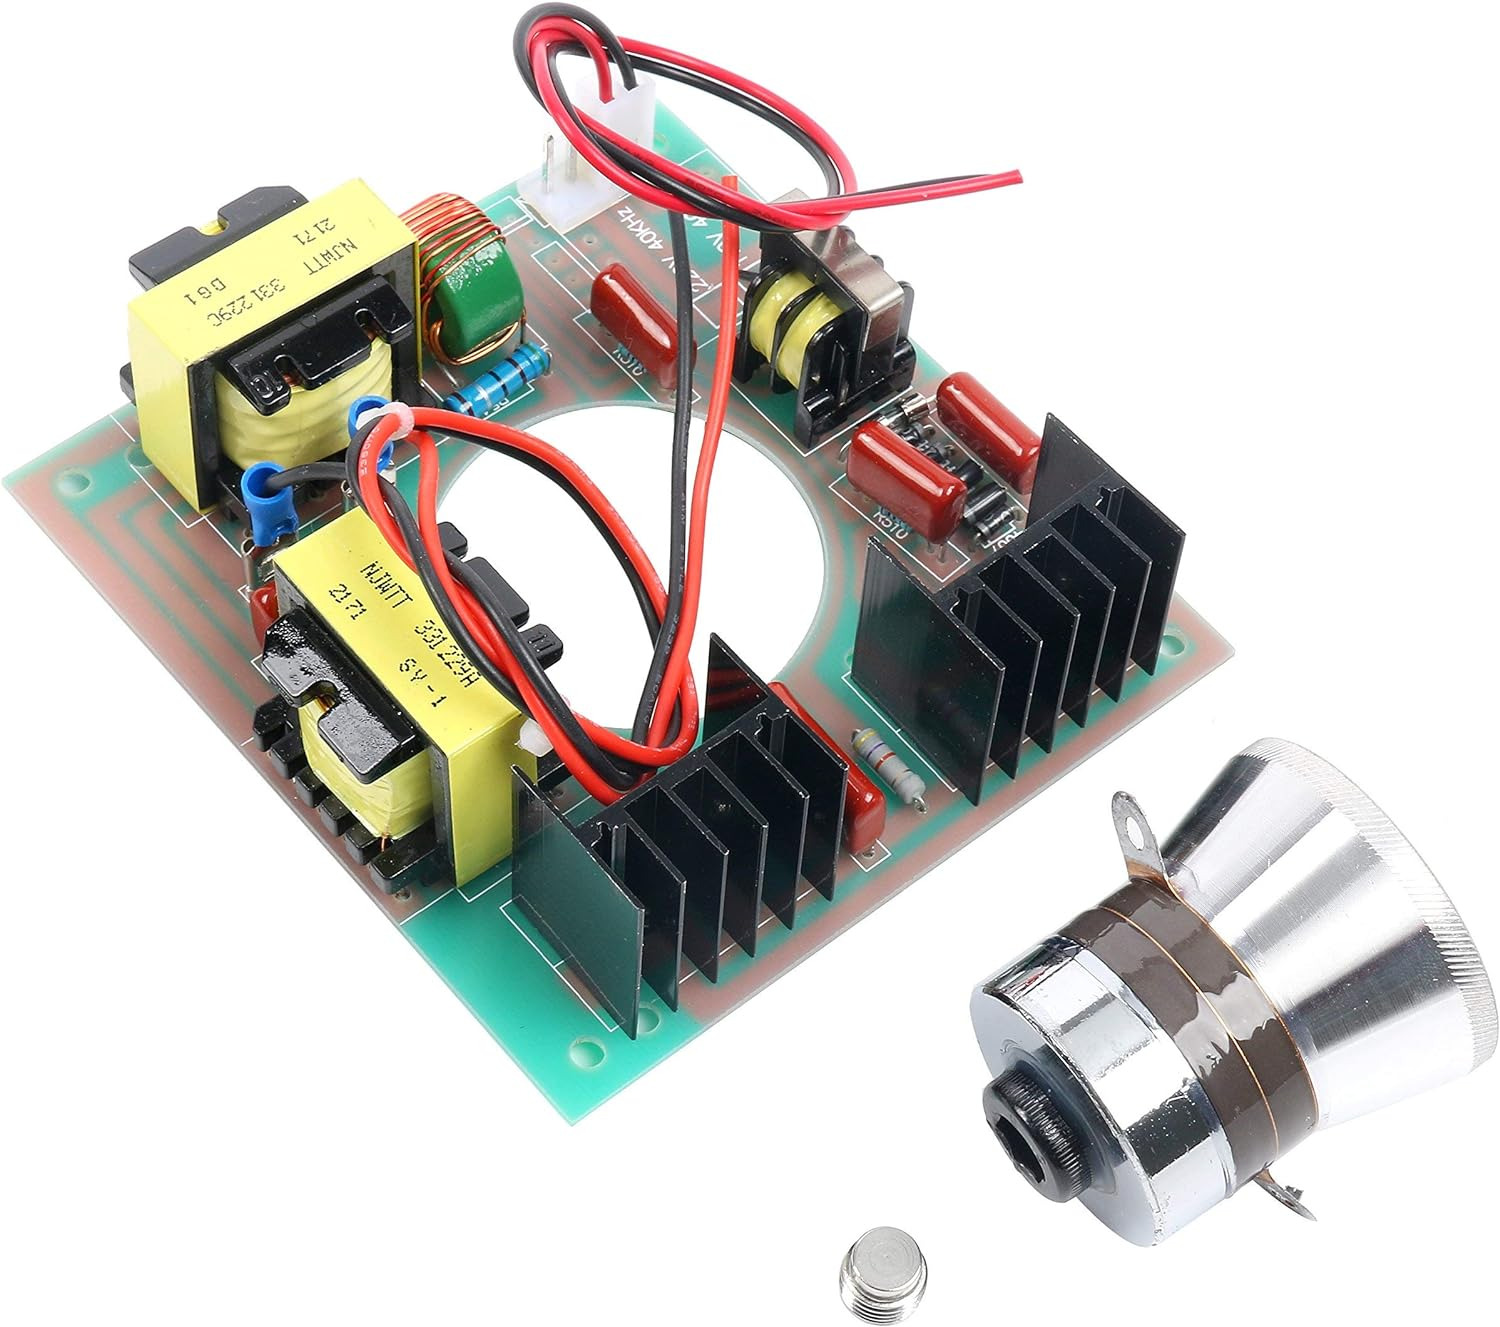 60W 40Khz Ultrasonic Cleaning Transducer Cleaner + Power Driver Board 11